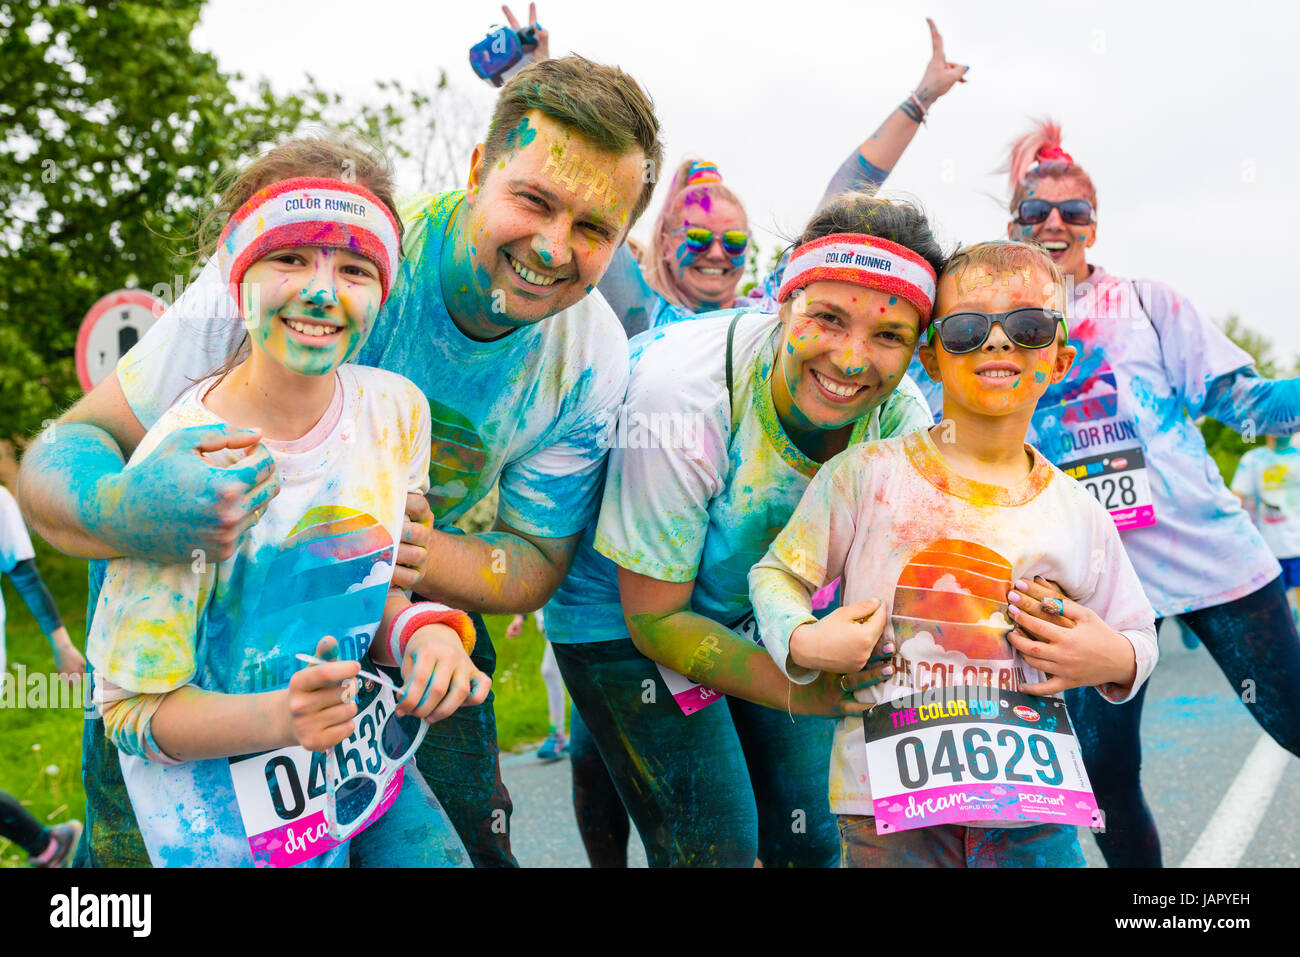 Colourful Run Takes Over Downtown Kitchener Cbc News